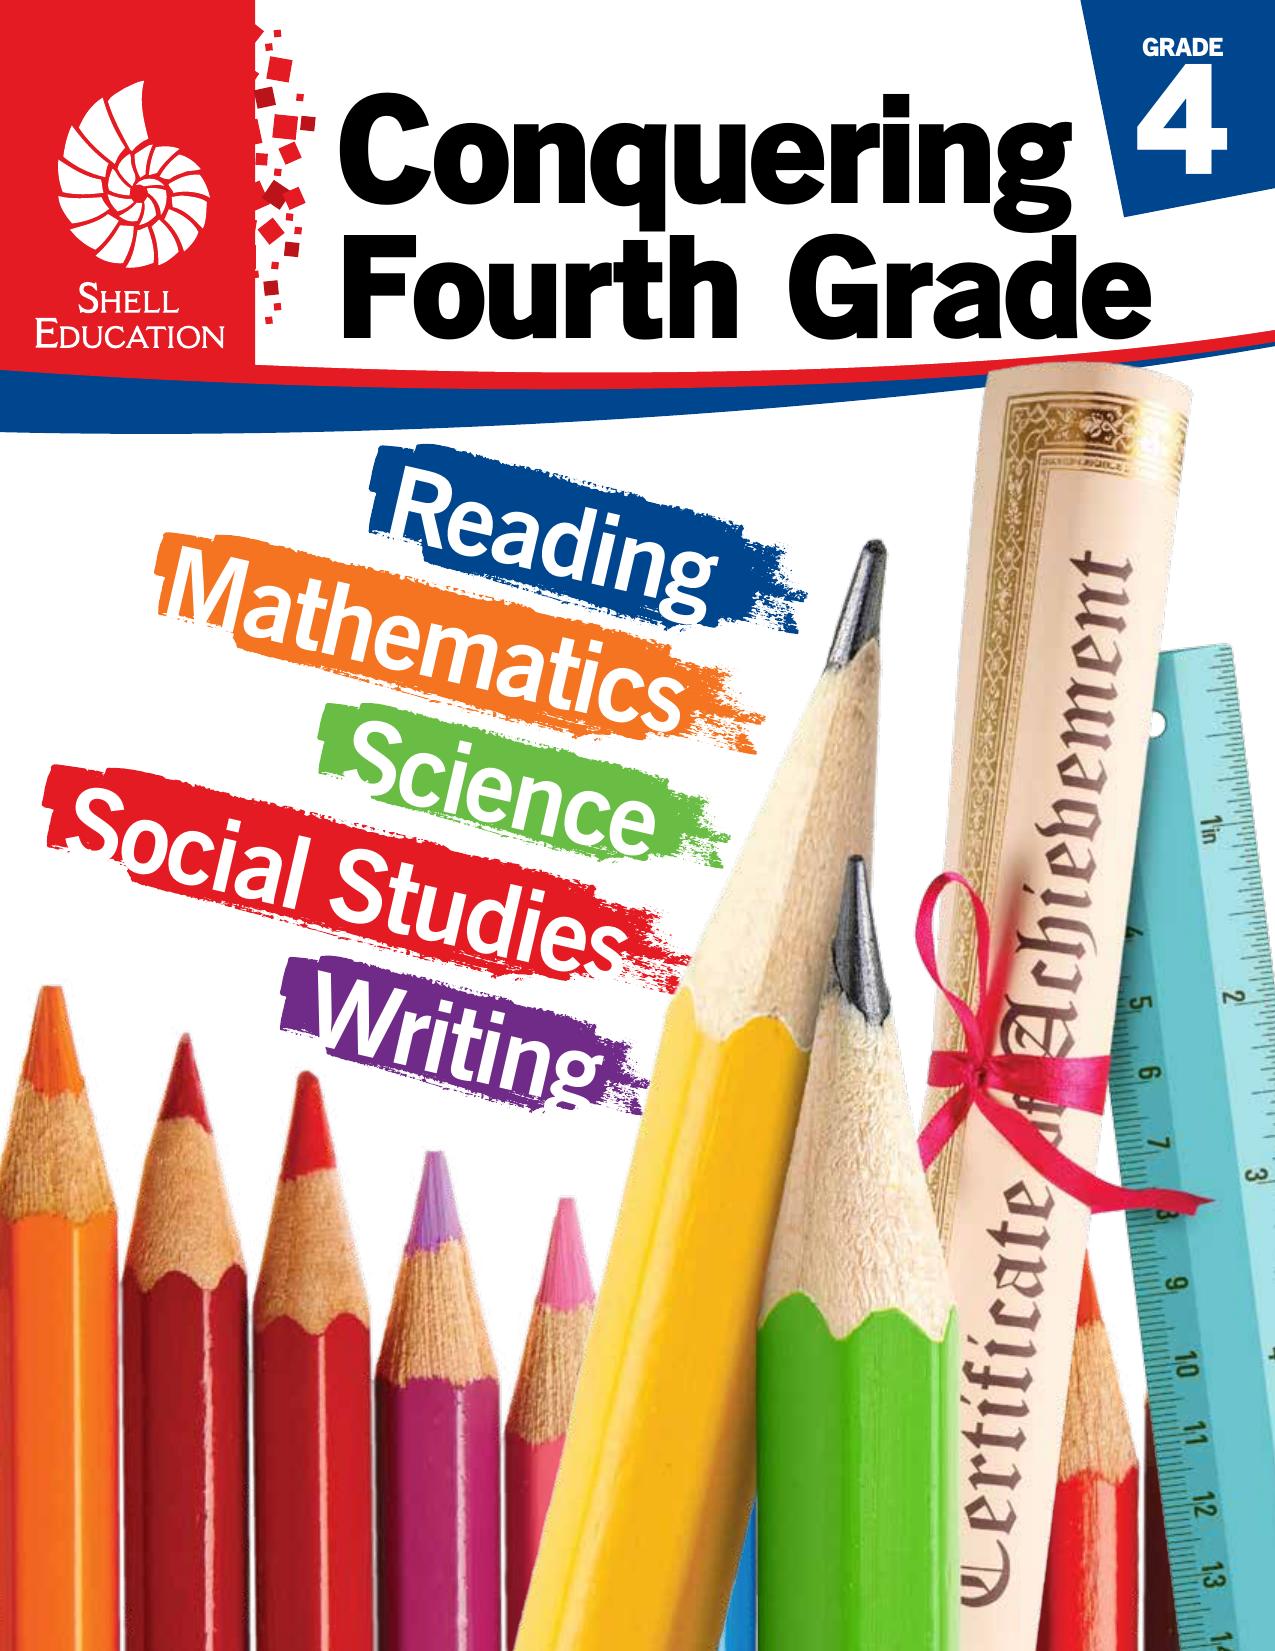 Conquering Fourth Grade by Jennifer Prior